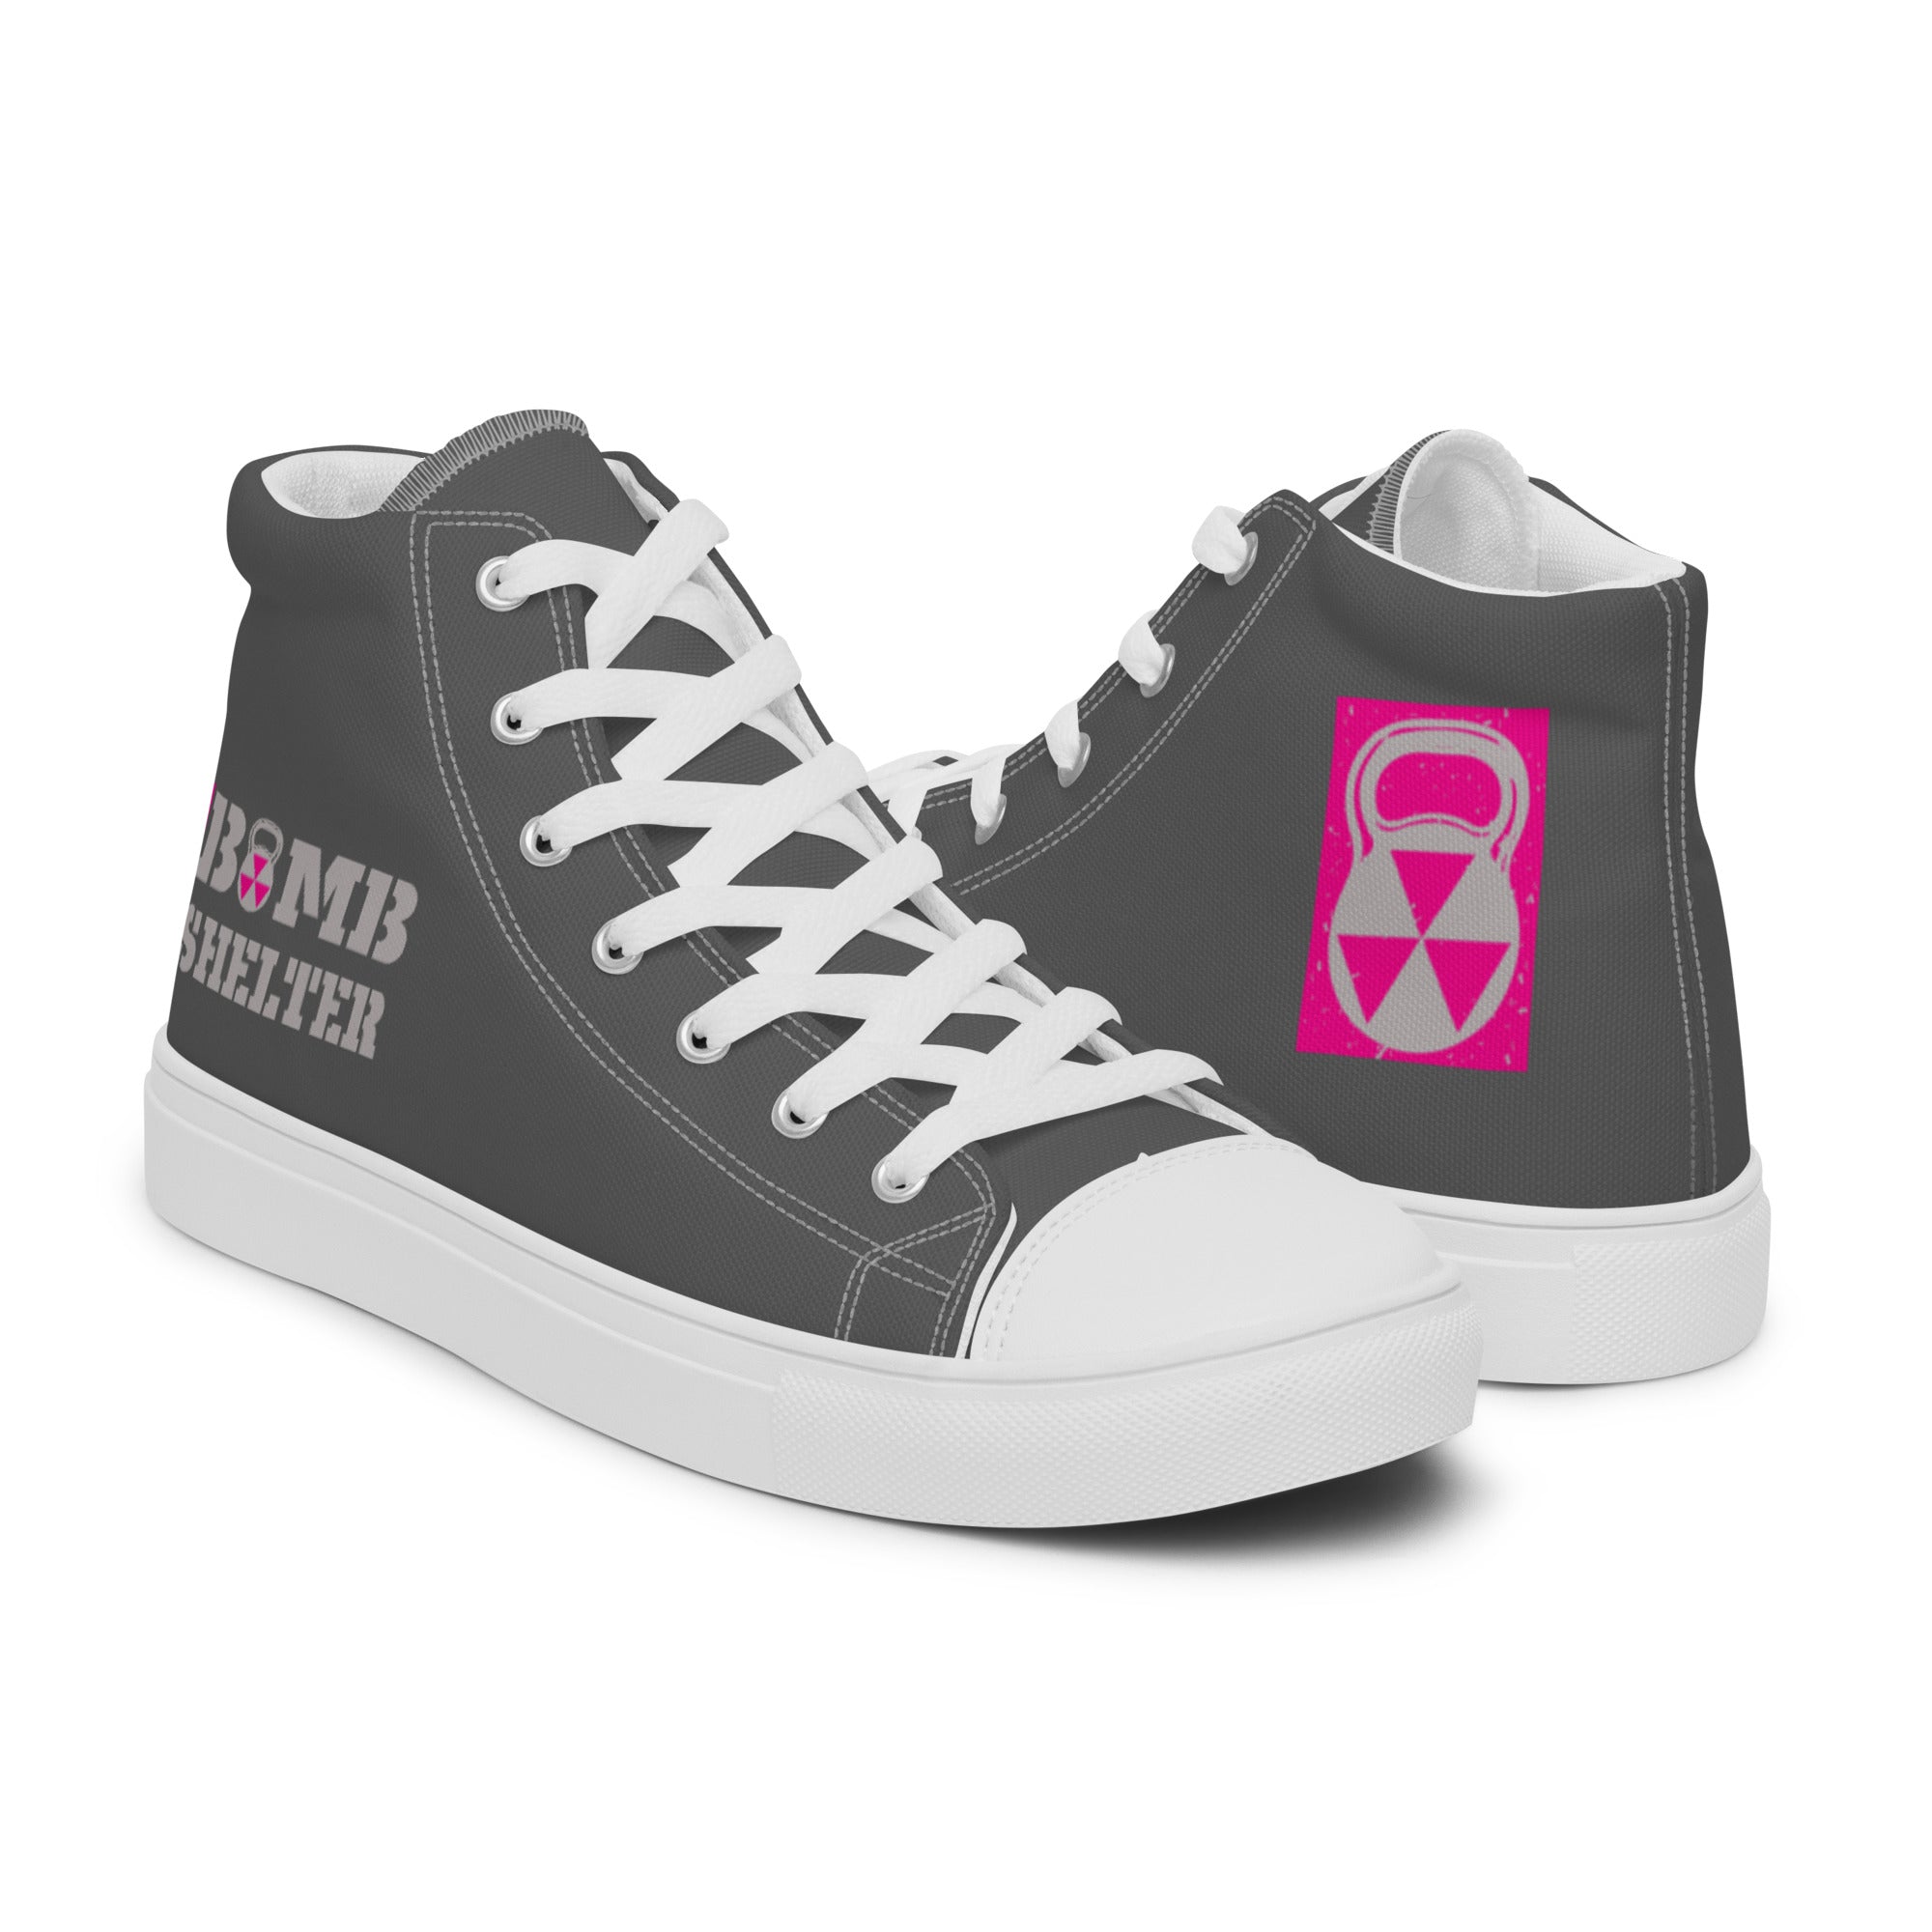 Gray/Pink Bomb Shelter Women’s high top canvas shoes